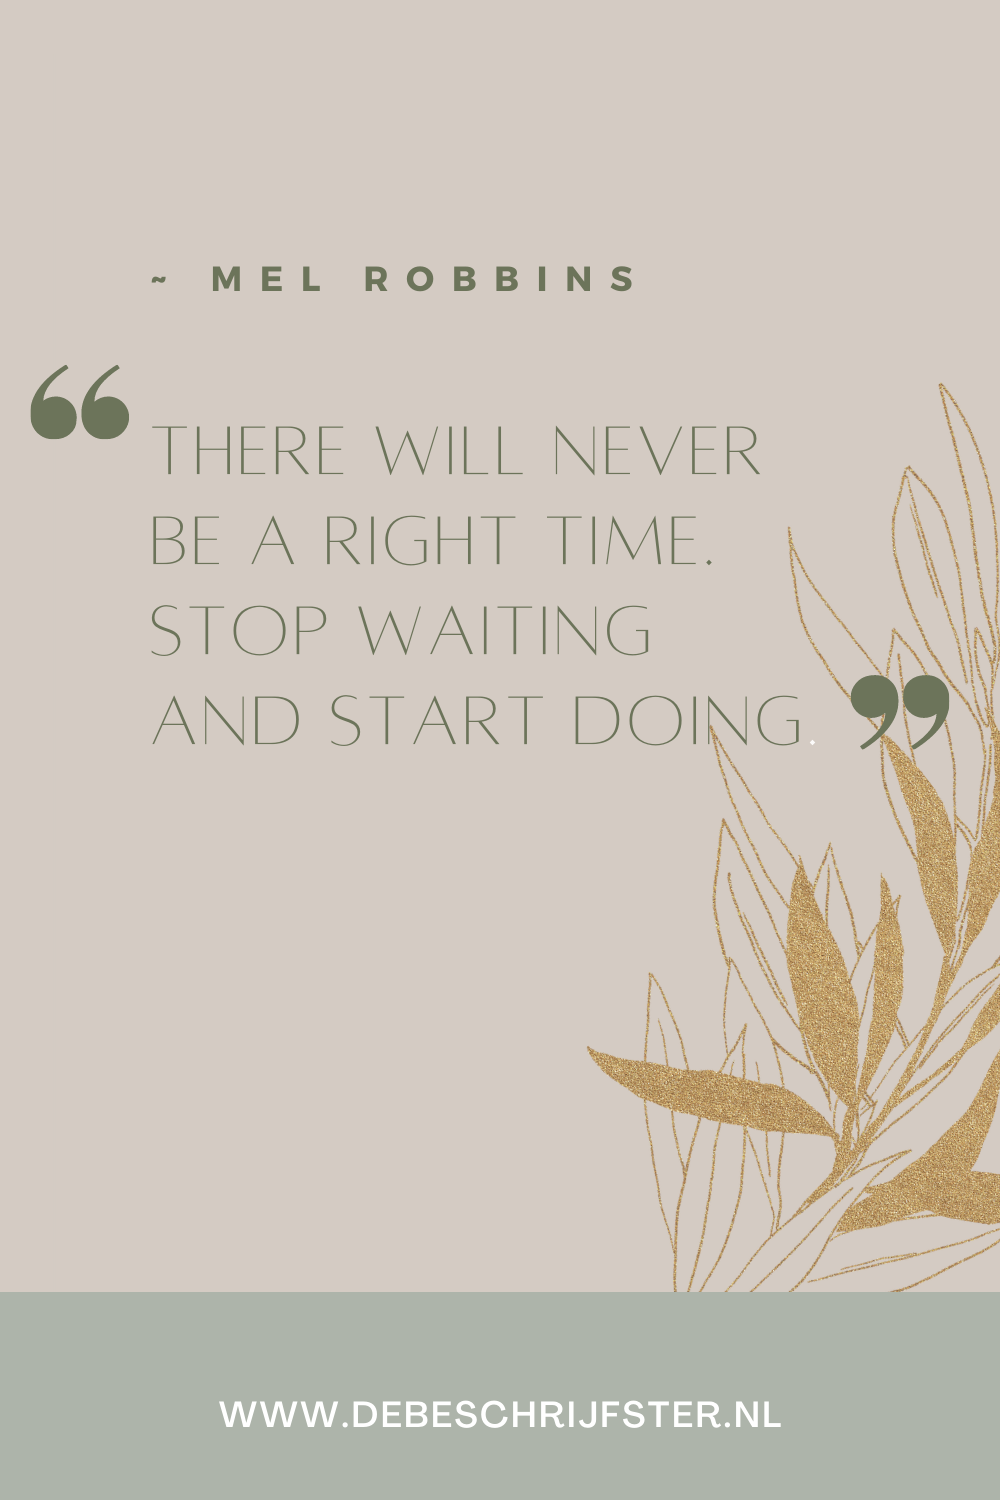 There will never be a right time. Stop waiting and start doing. Mel Robbins